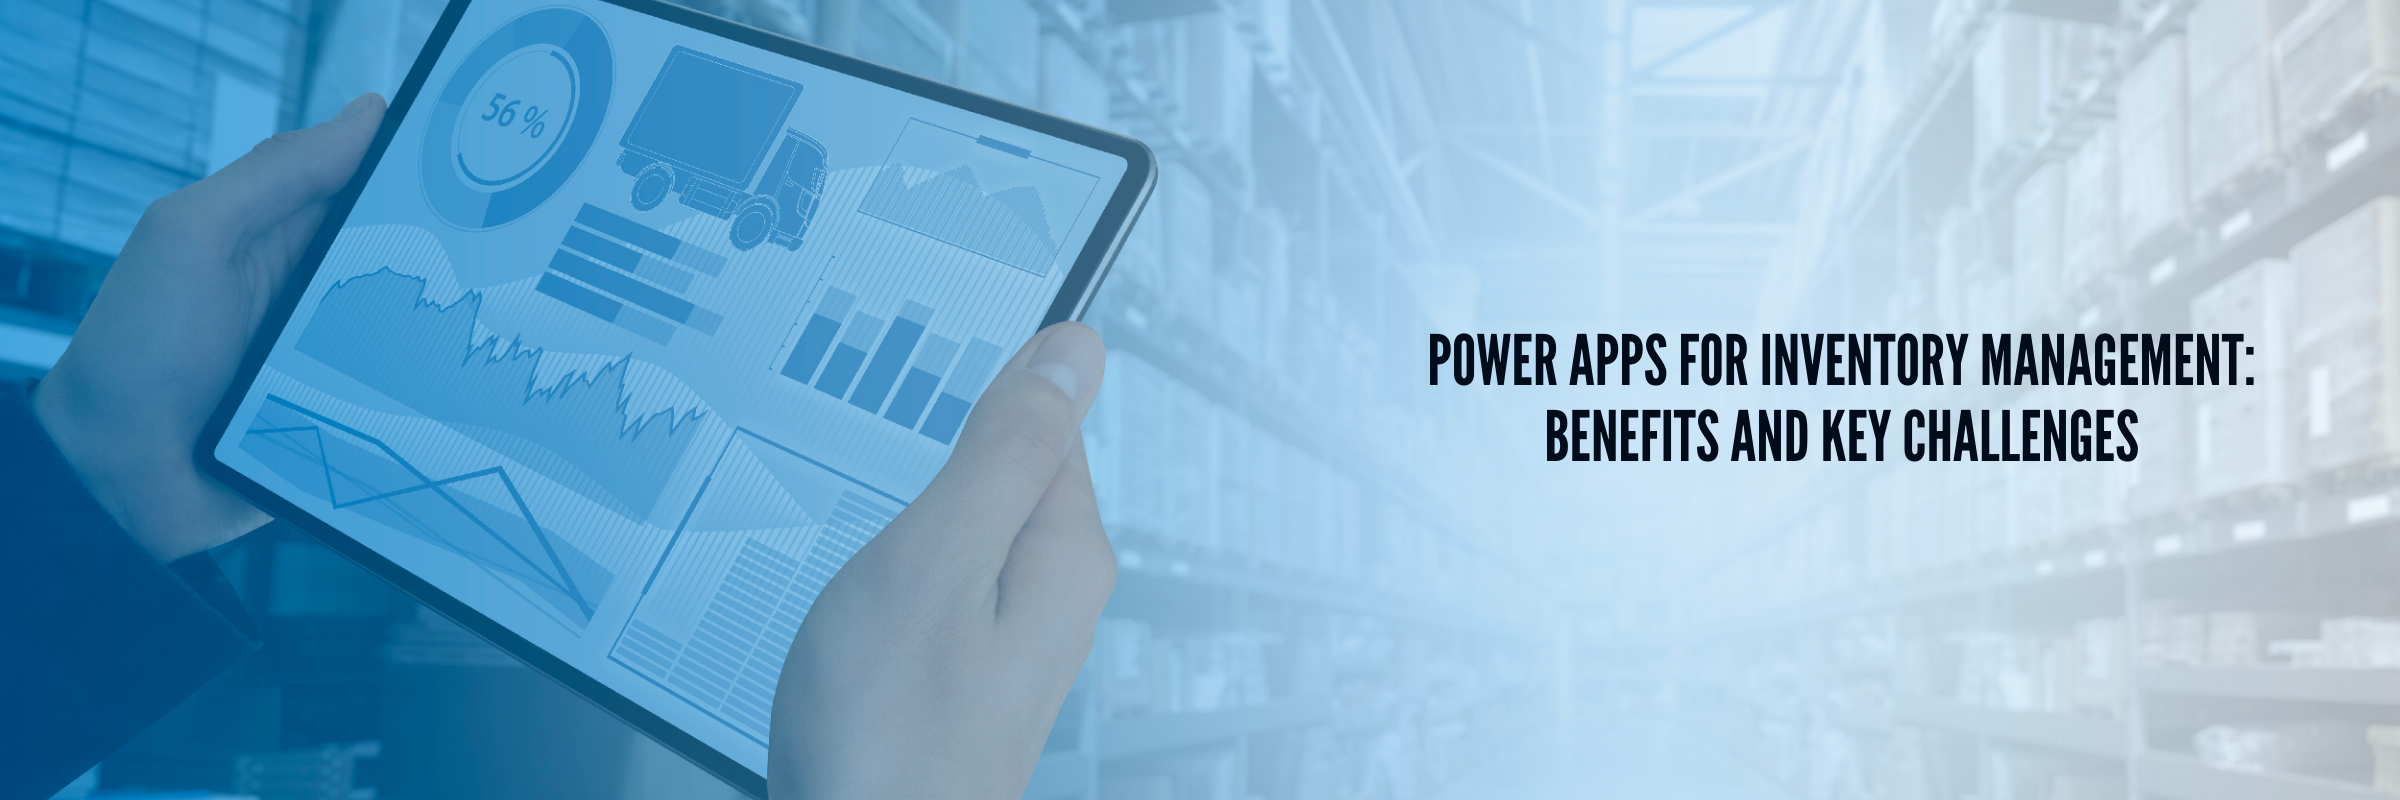 Power Apps for Inventory Management: Benefits and Key Challenges